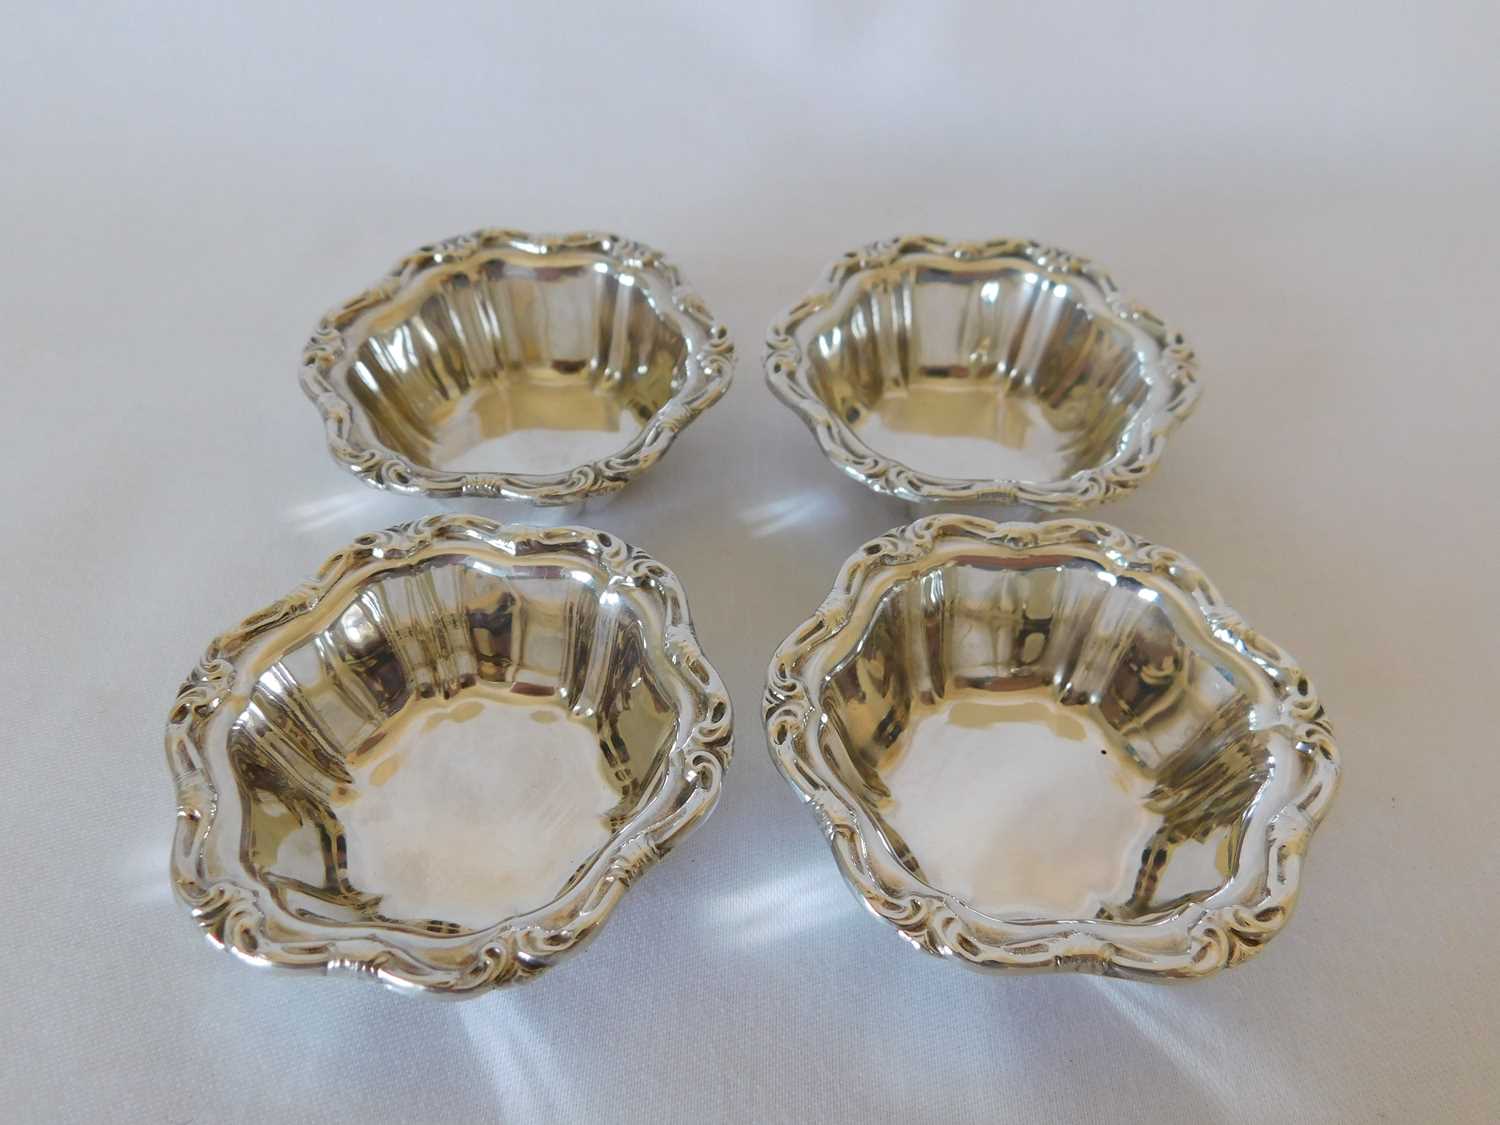 A set of four Canadian silver nut dishes, early 20th century, each with scroll decorated rim, struck